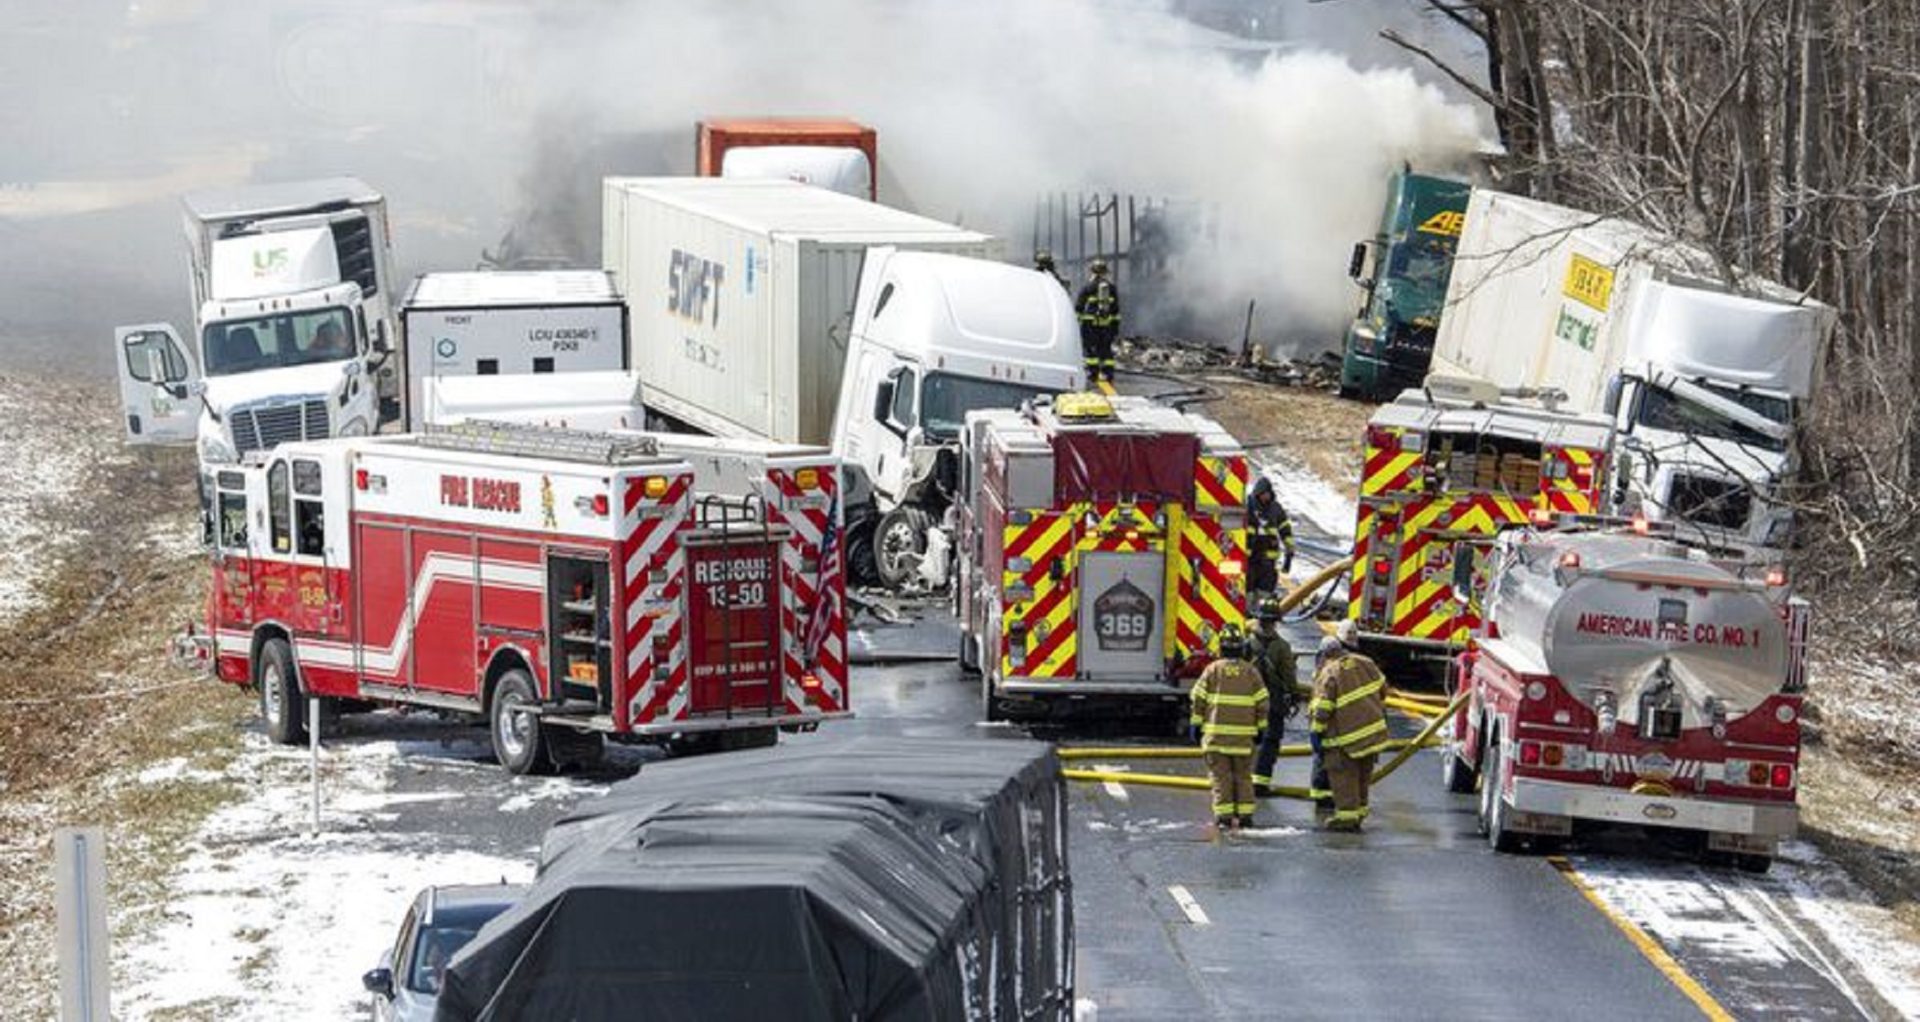 Interstate 81 North near the Minersville exit, Foster Twp., Pa., was the scene of a multi-vehicle crash on Monday, March 28, 2022.